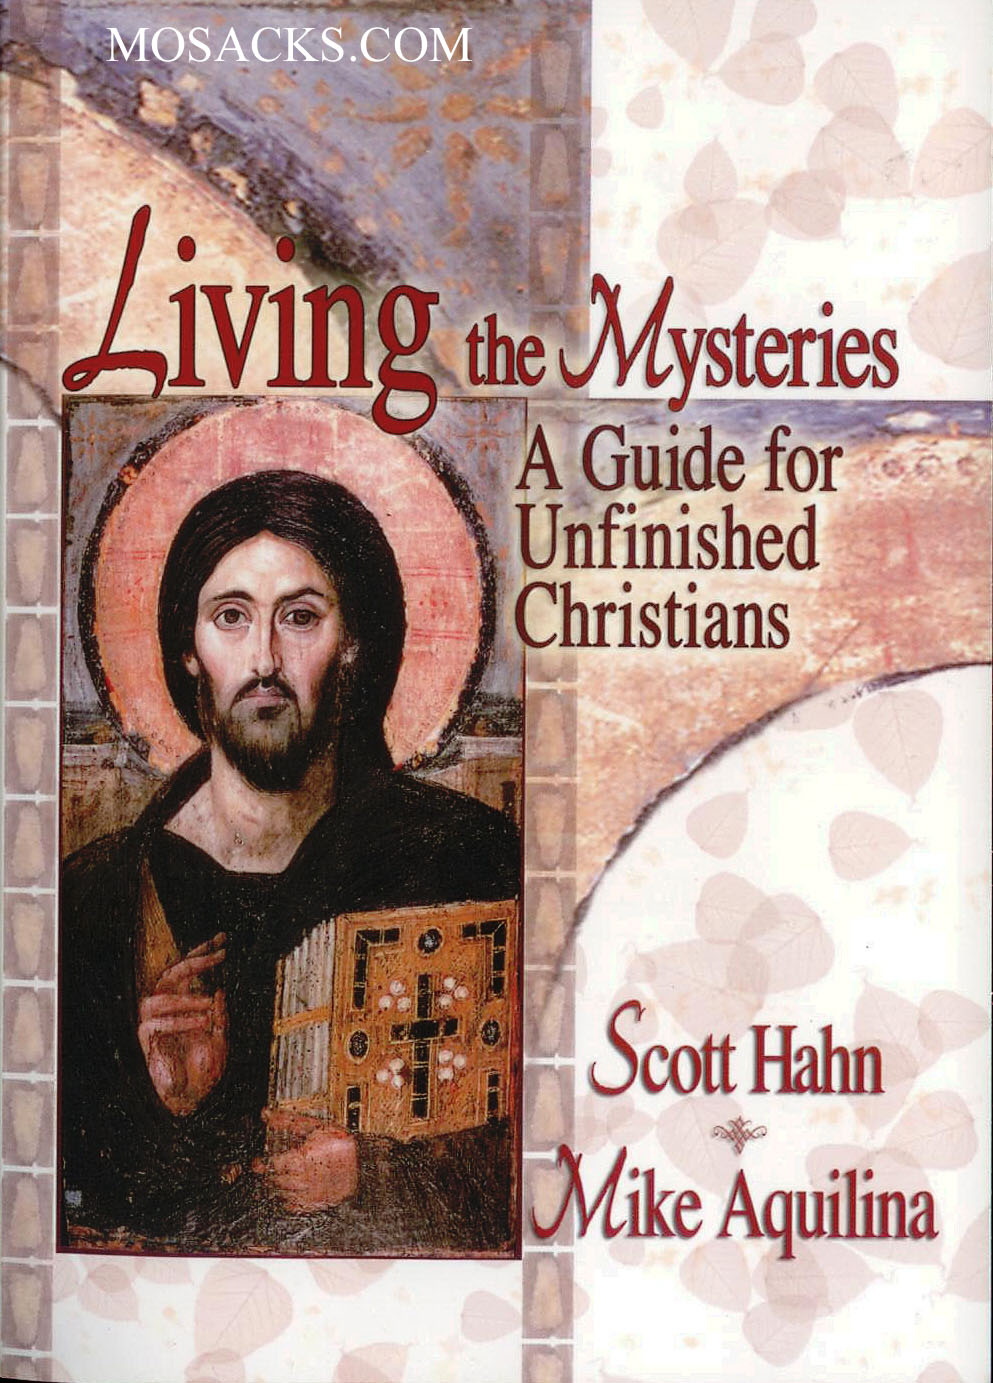 Living the Mysteries: A Guide for Unfinished Christians by Scott Hahn and Mike Aquilina 